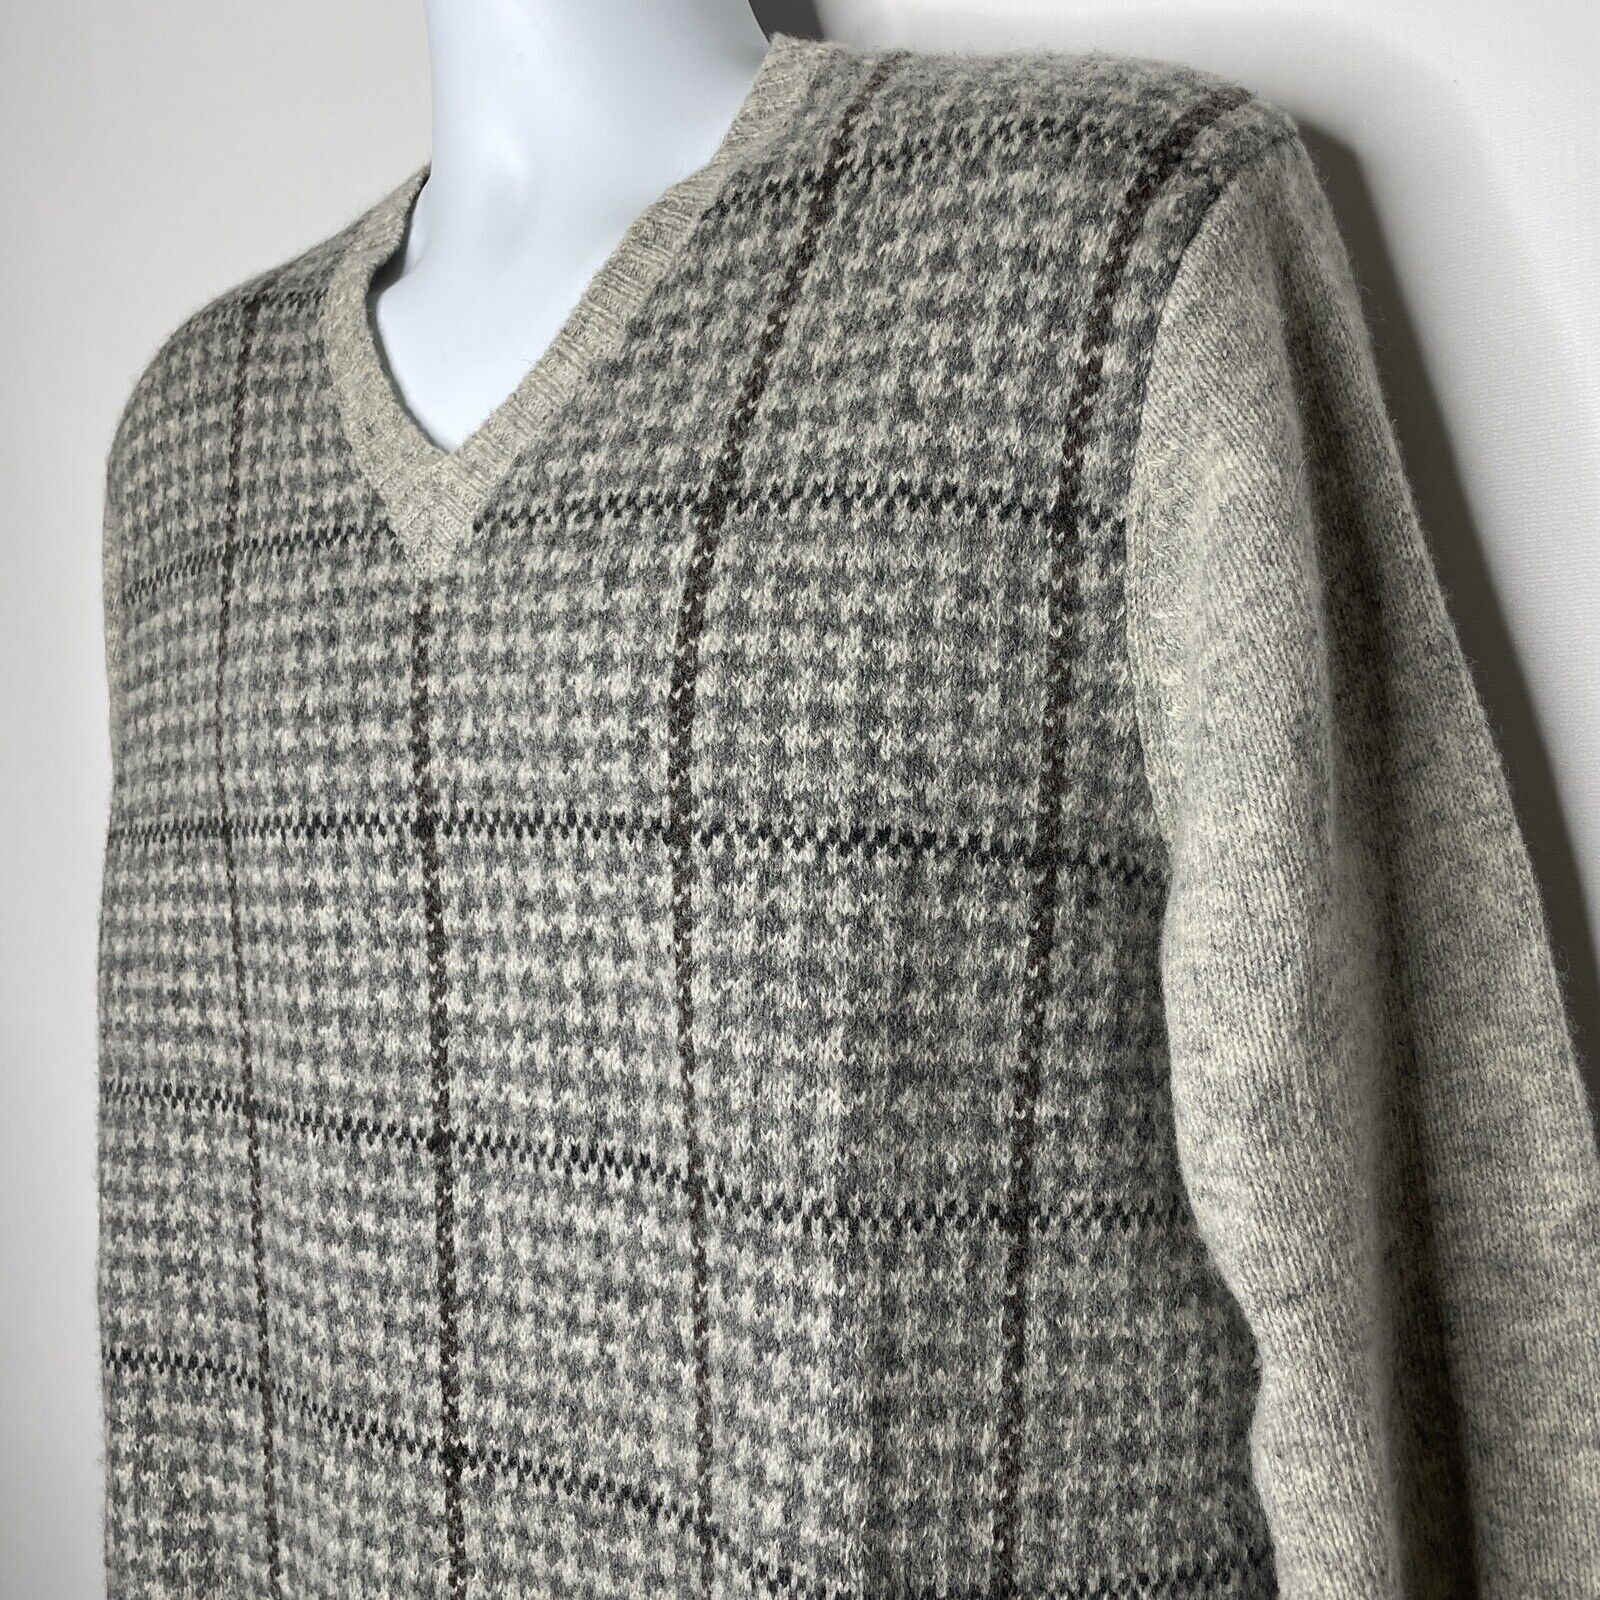 Vintage 80s Gray Shetland Wool Houndstooth Plaid Pullover Sweater Size US L / EU 52-54 / 3 - 6 Thumbnail